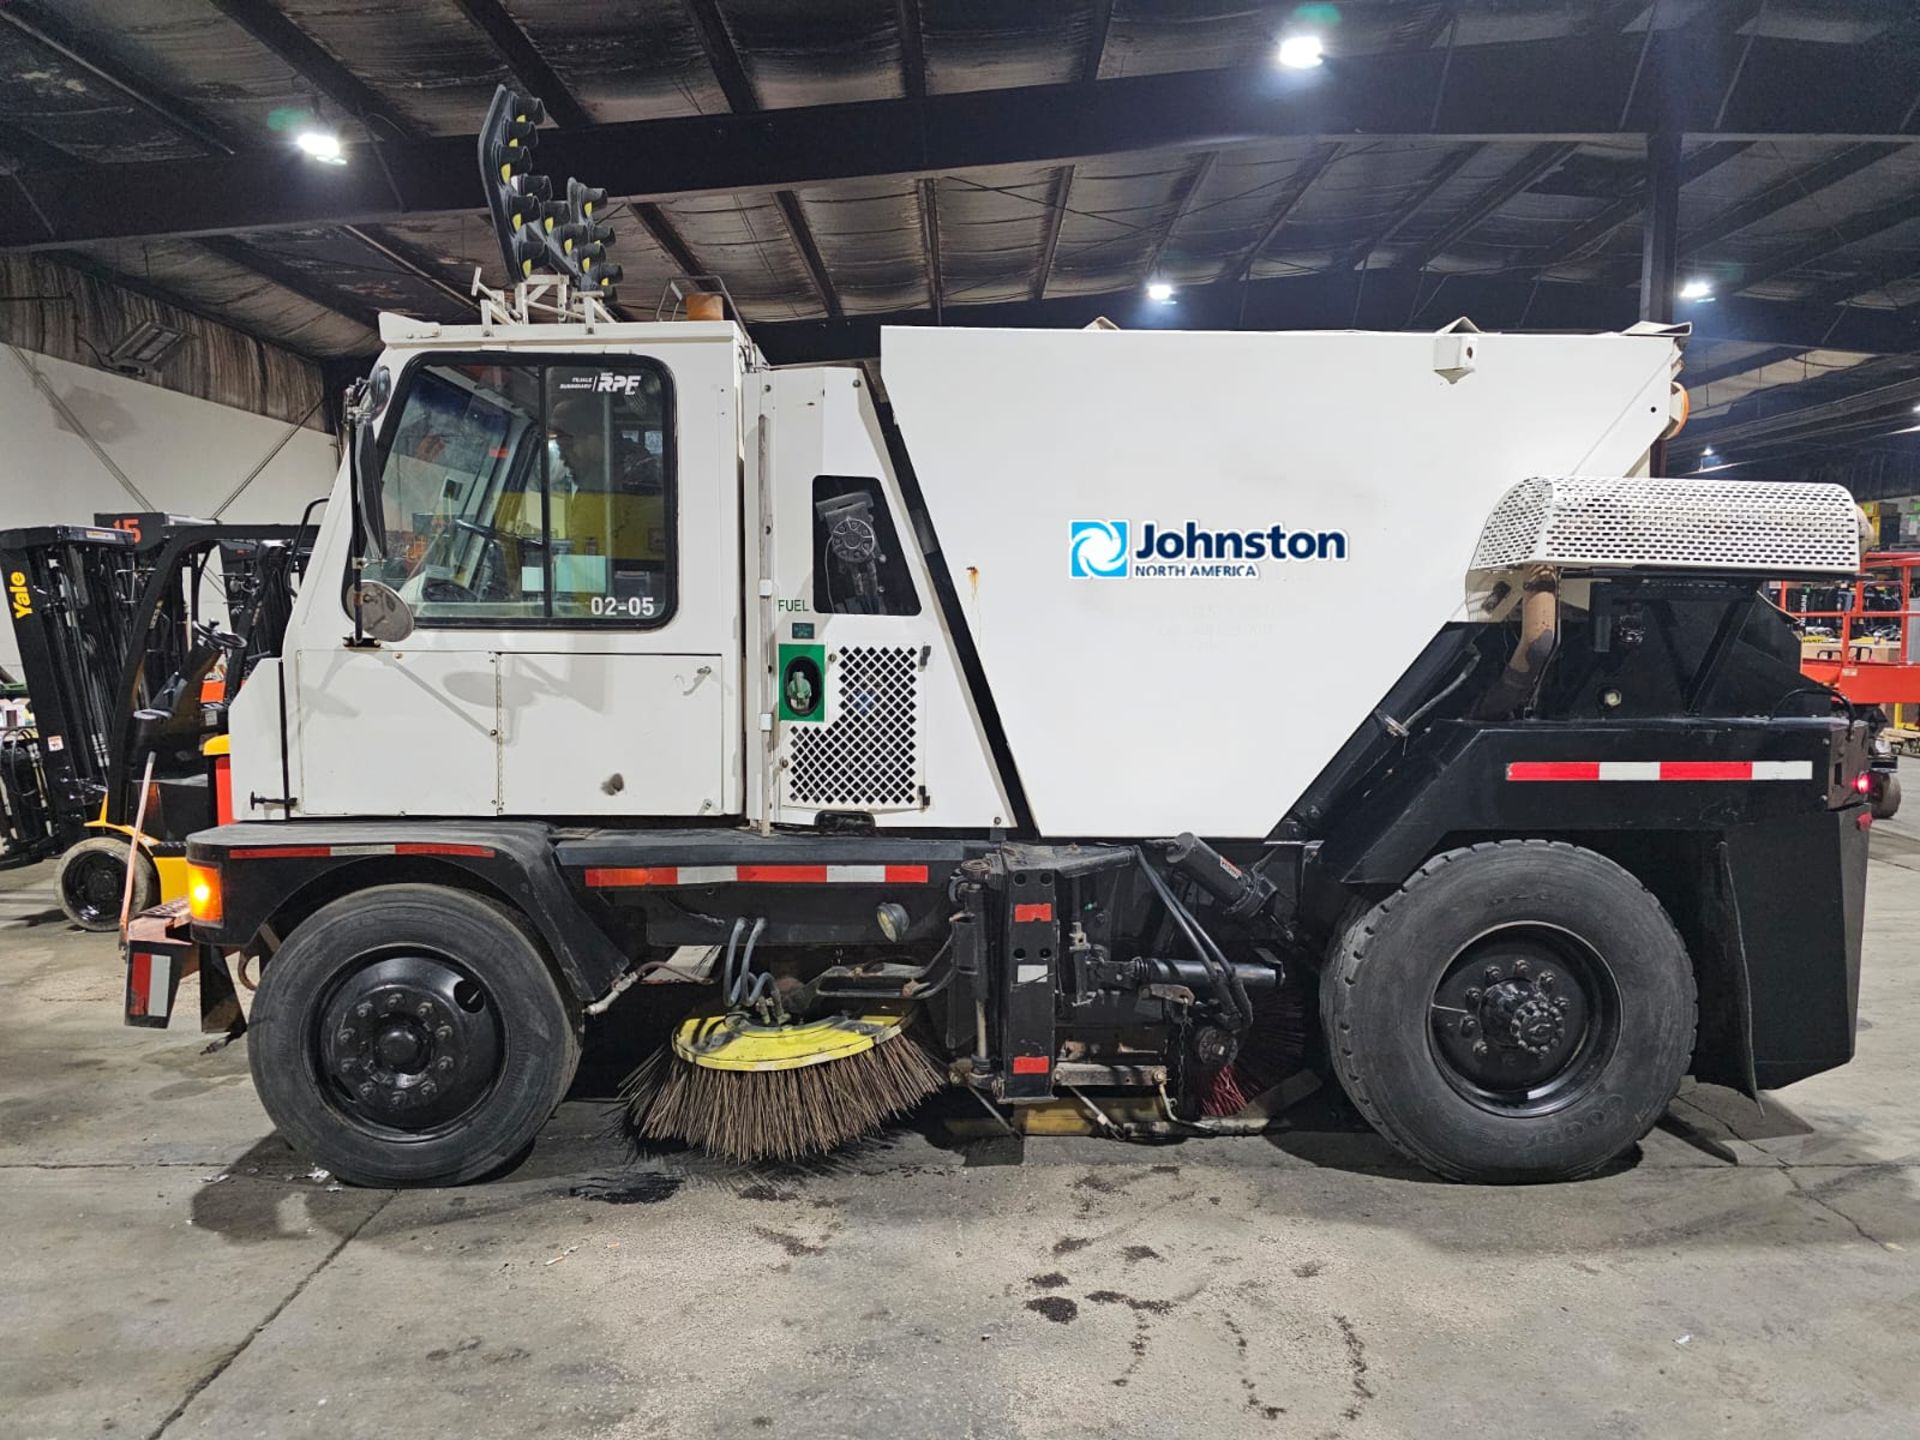 Johnston Model 4000 Outdoor Street Sweeper Scrubber Unit - Diesel with Low Hours and 2 seats - Image 6 of 7